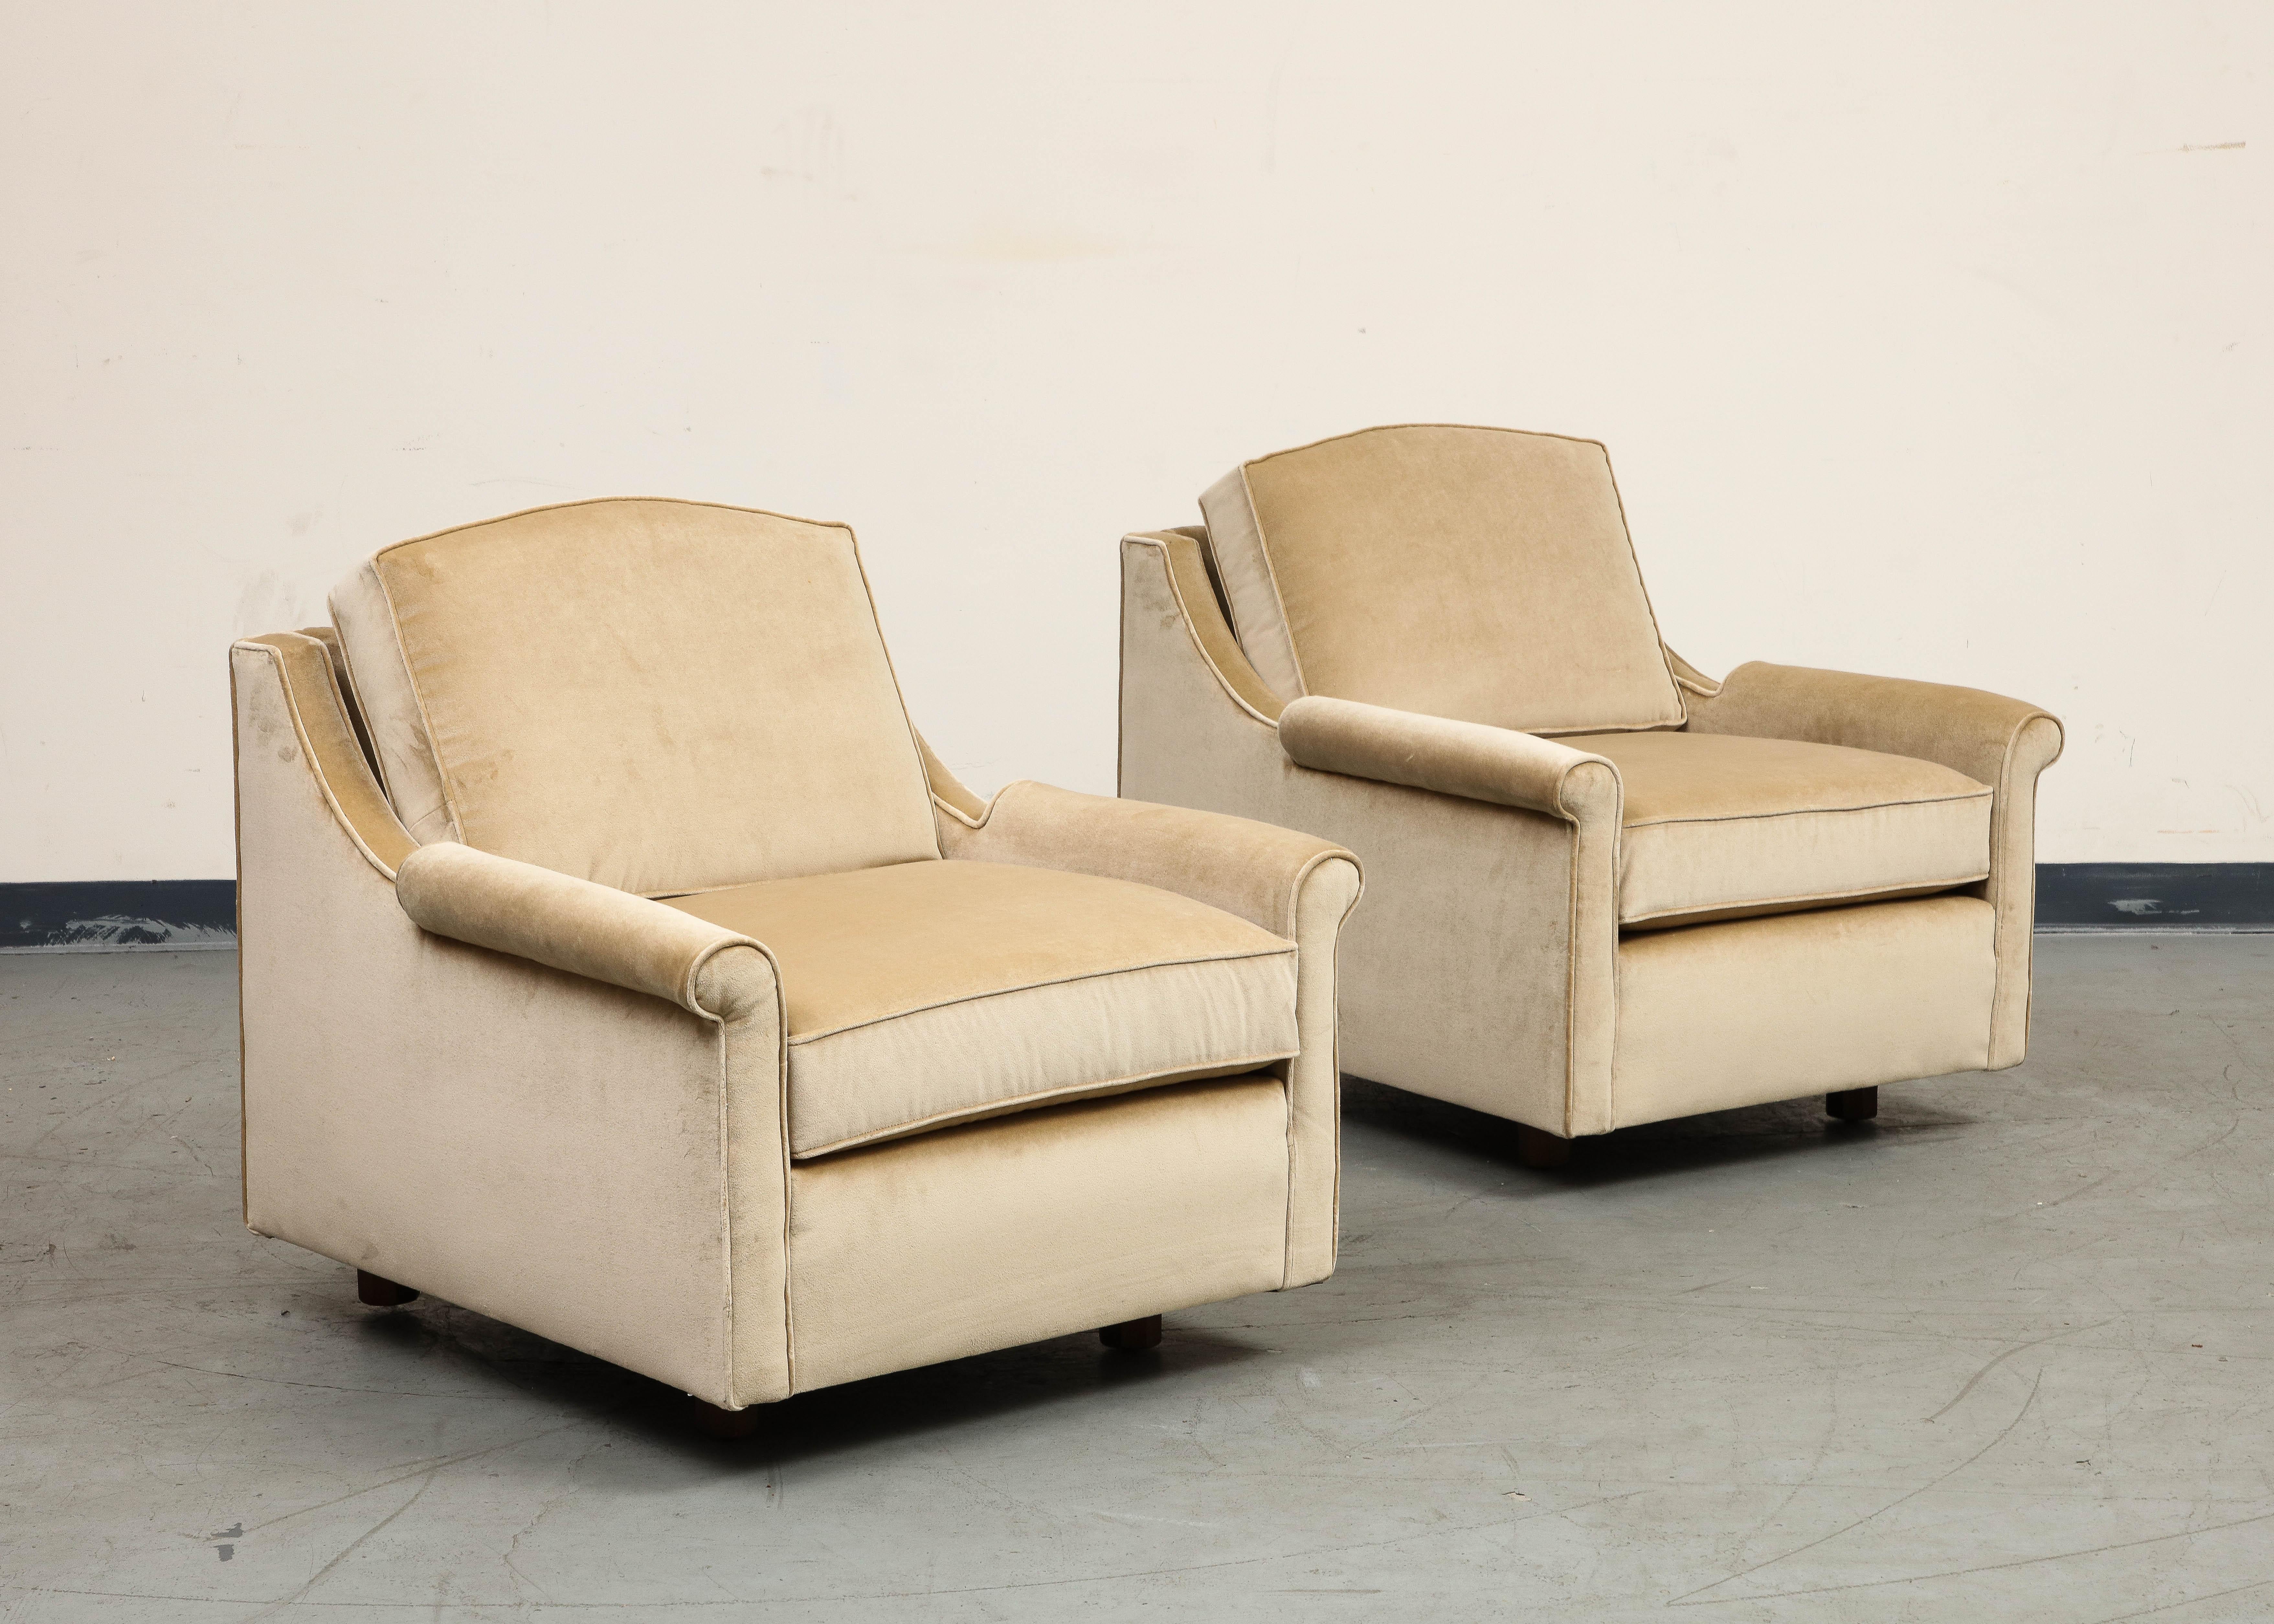 Pair of 1940s Tan Velvet Club Chairs, Newly Upholstered In Good Condition For Sale In Chicago, IL